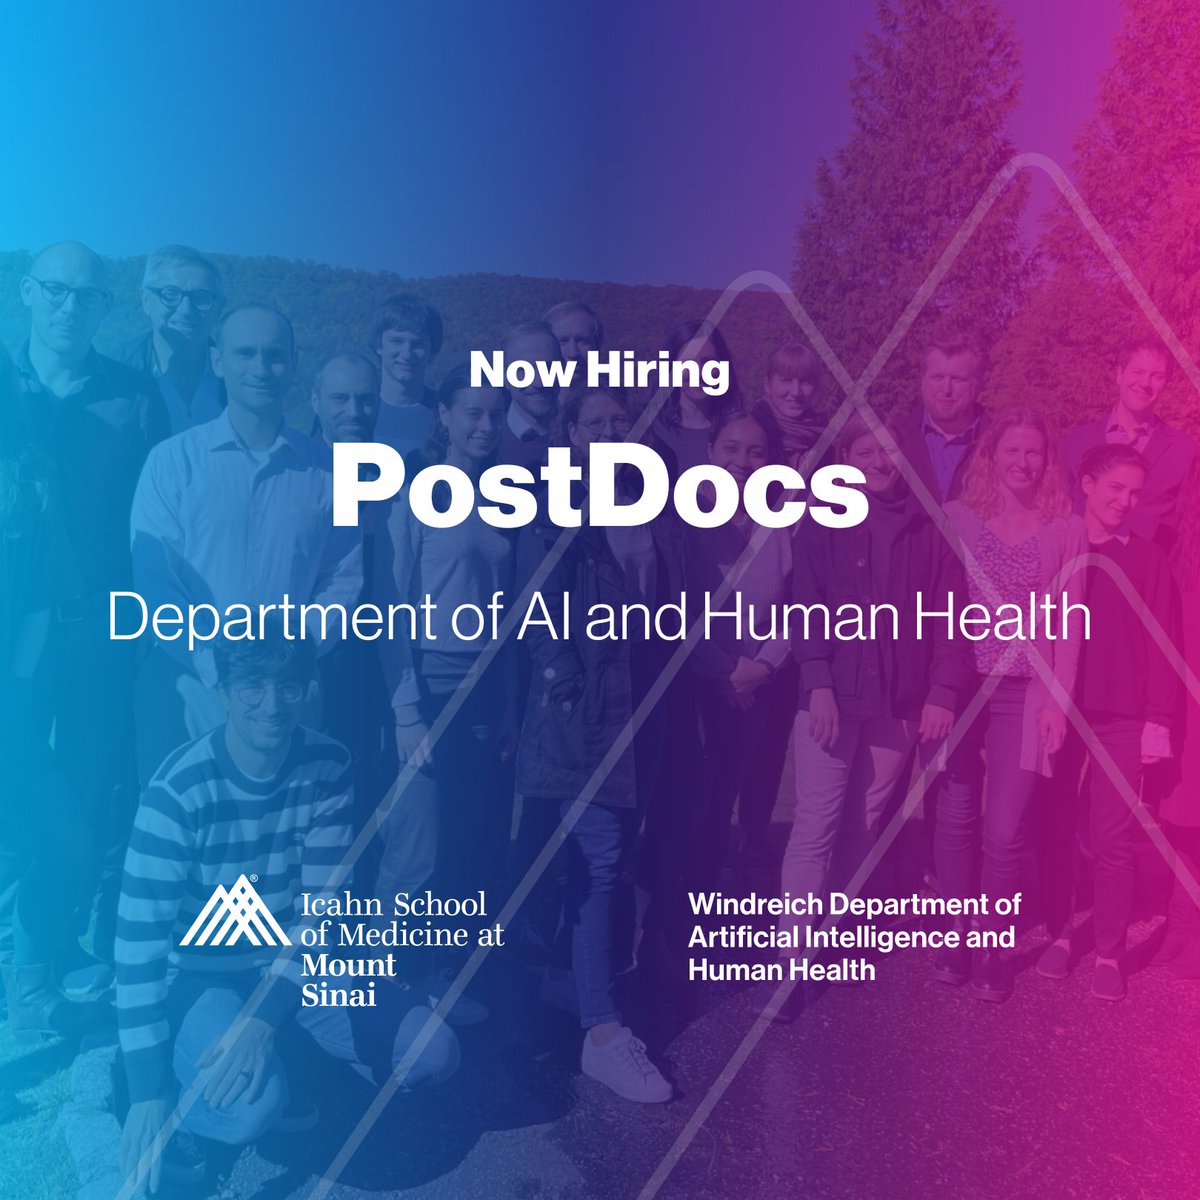 Looking to combine #machinelearning tools and #womenshealth research? The lab of Dr. Ipek Ensari is hiring #postdocs! Learn more about her ongoing #mobilehealth research projects and how to apply here: linkedin.com/jobs/view/3630…